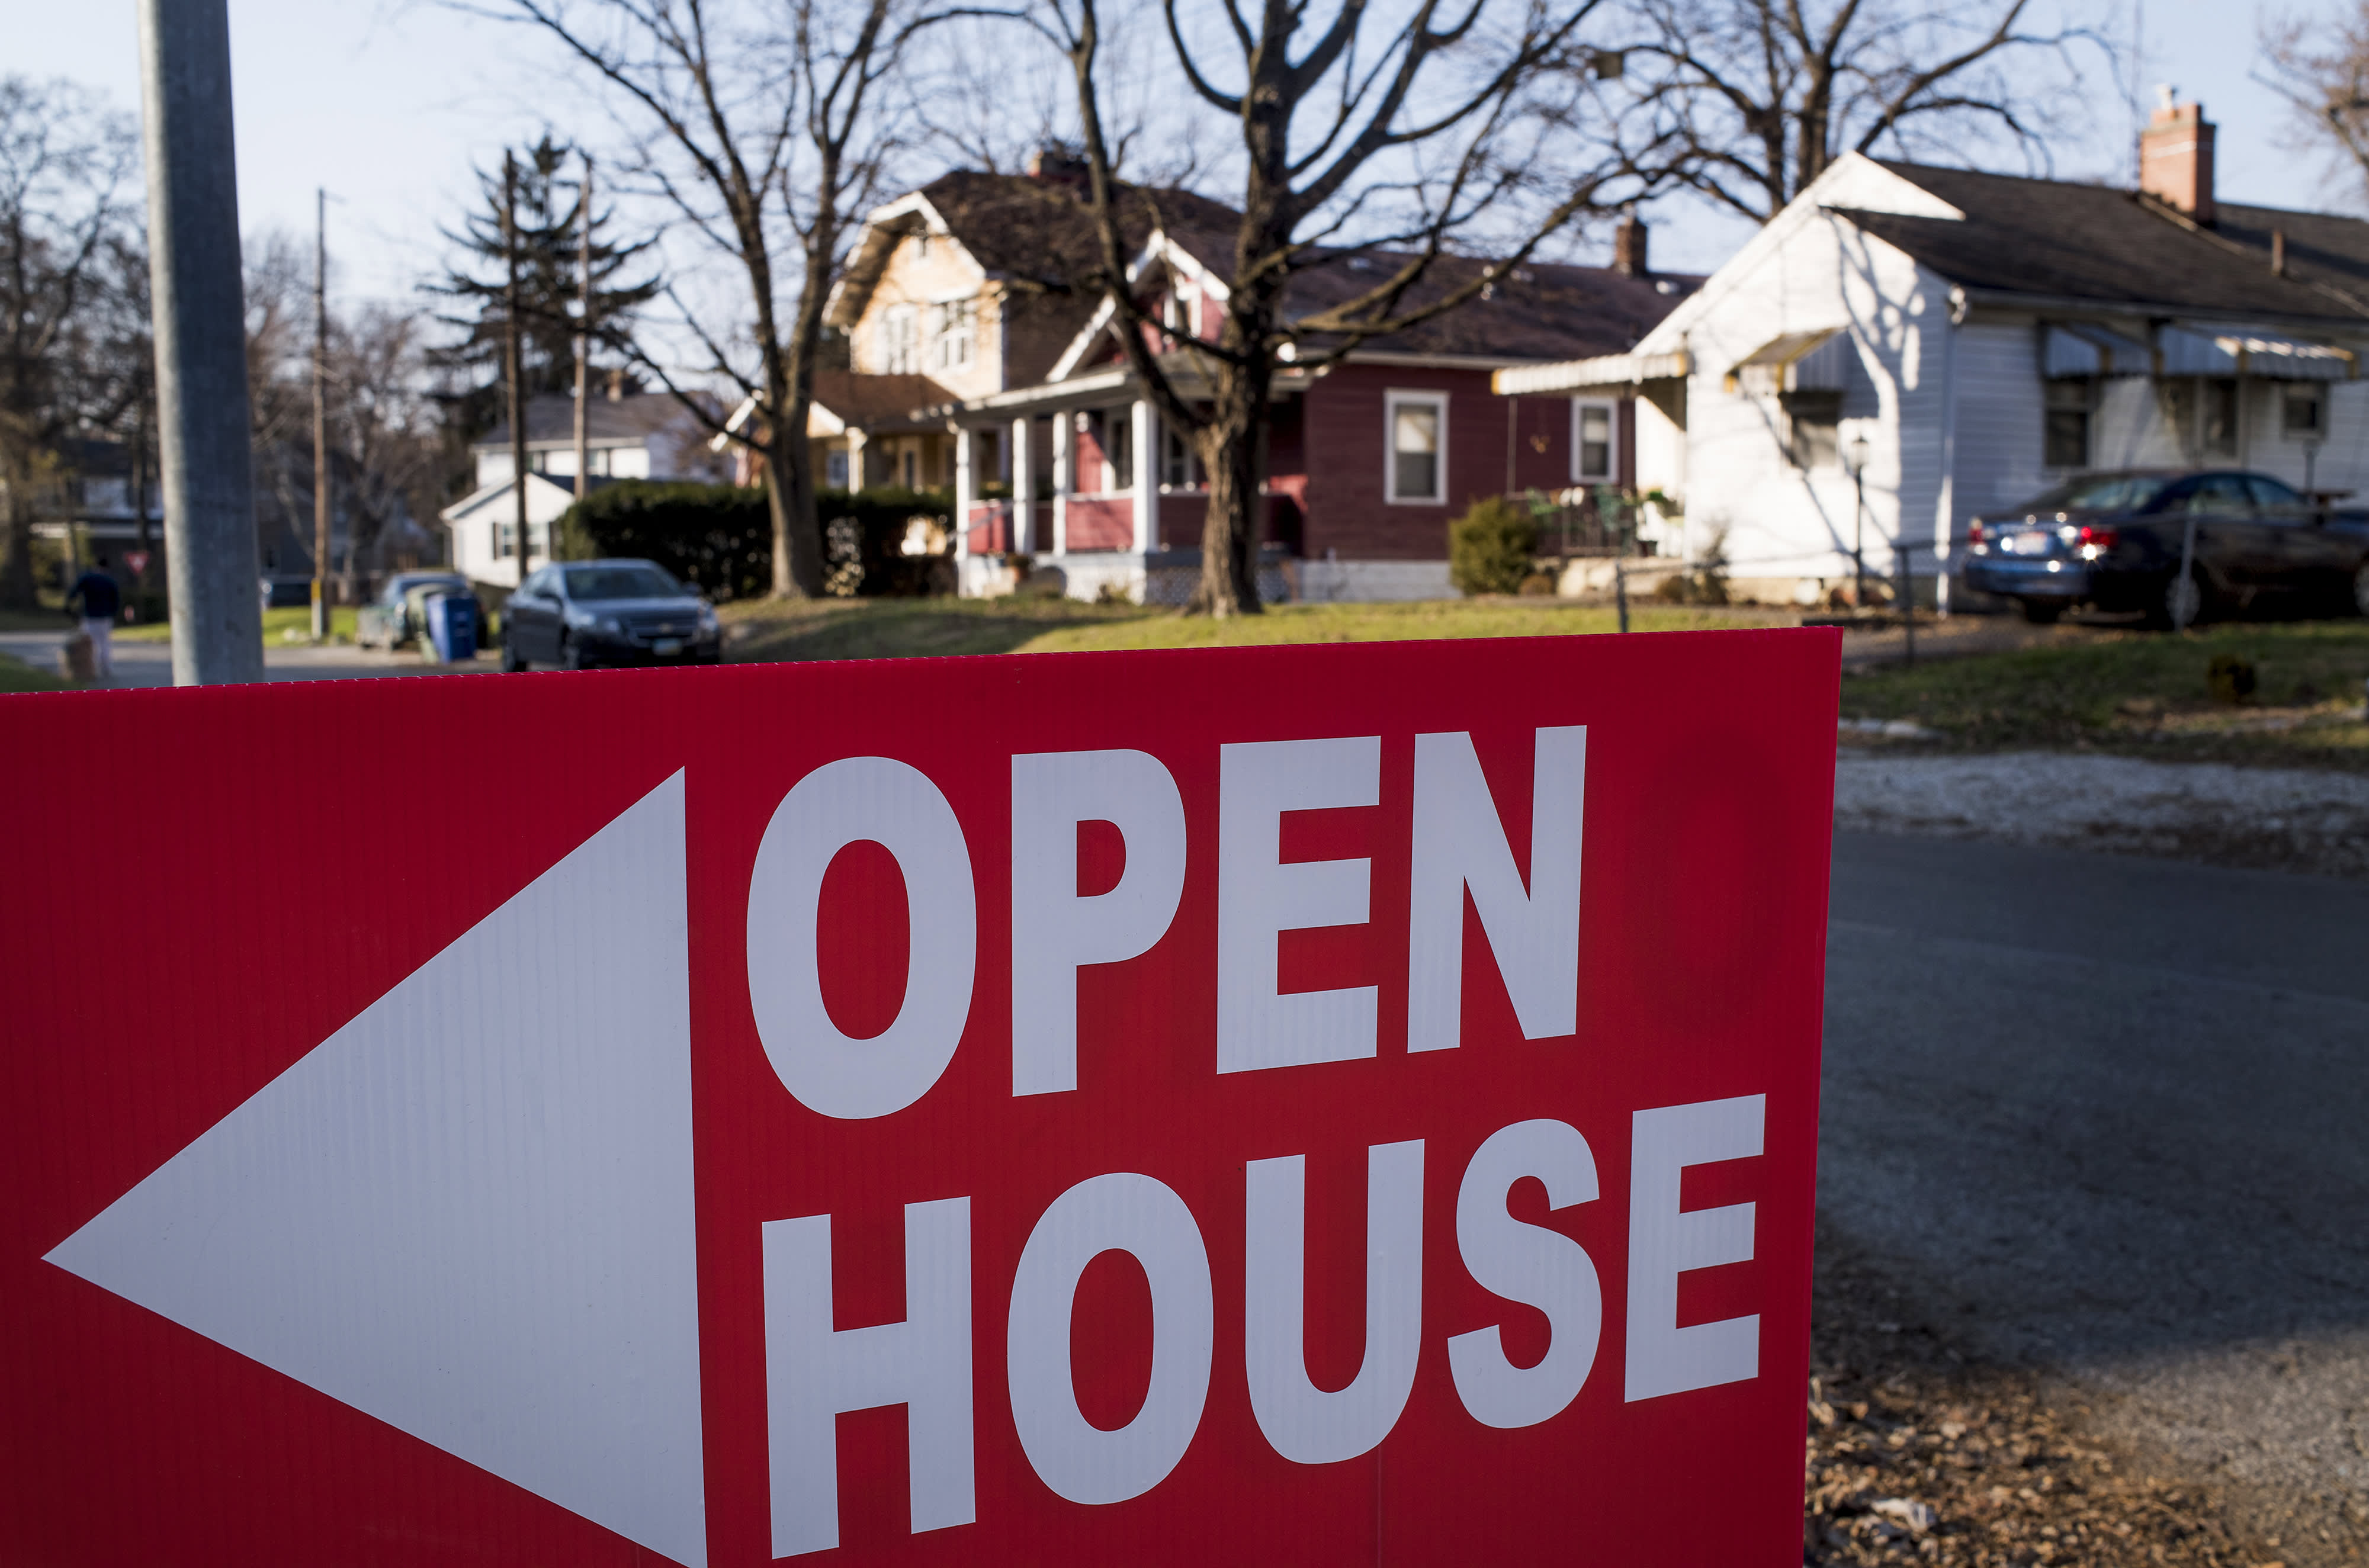 Mortgage demand from homebuyers pulled back sharply, even as rates ended 2020 near record low